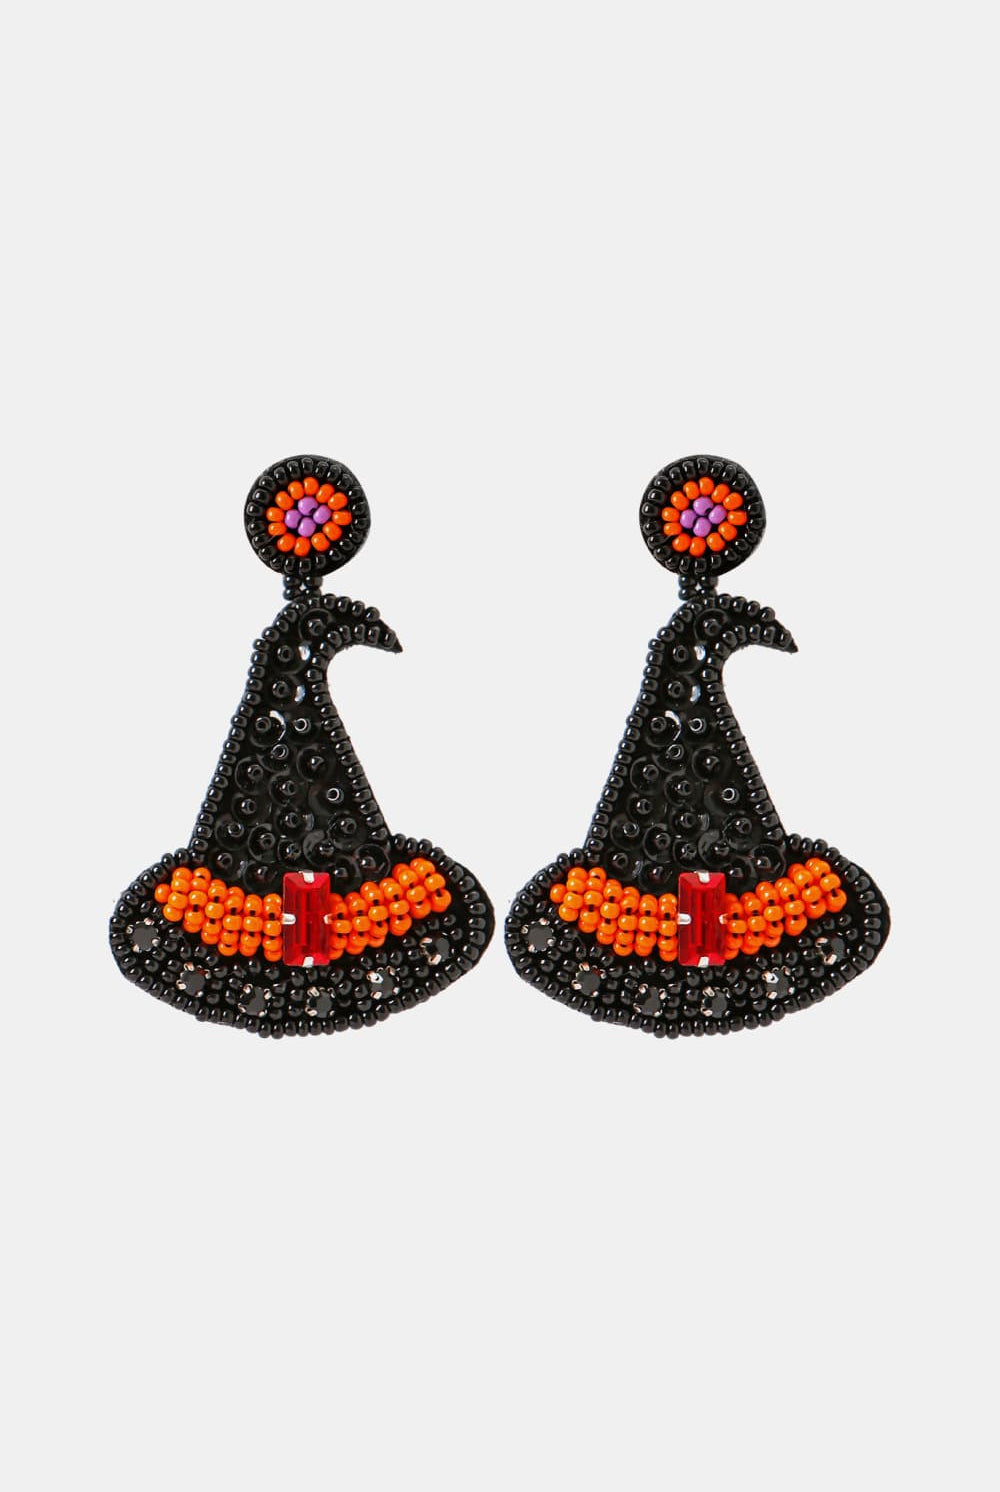 Witch's Hat Shape Beaded Dangle Earrings - GemThreads Boutique